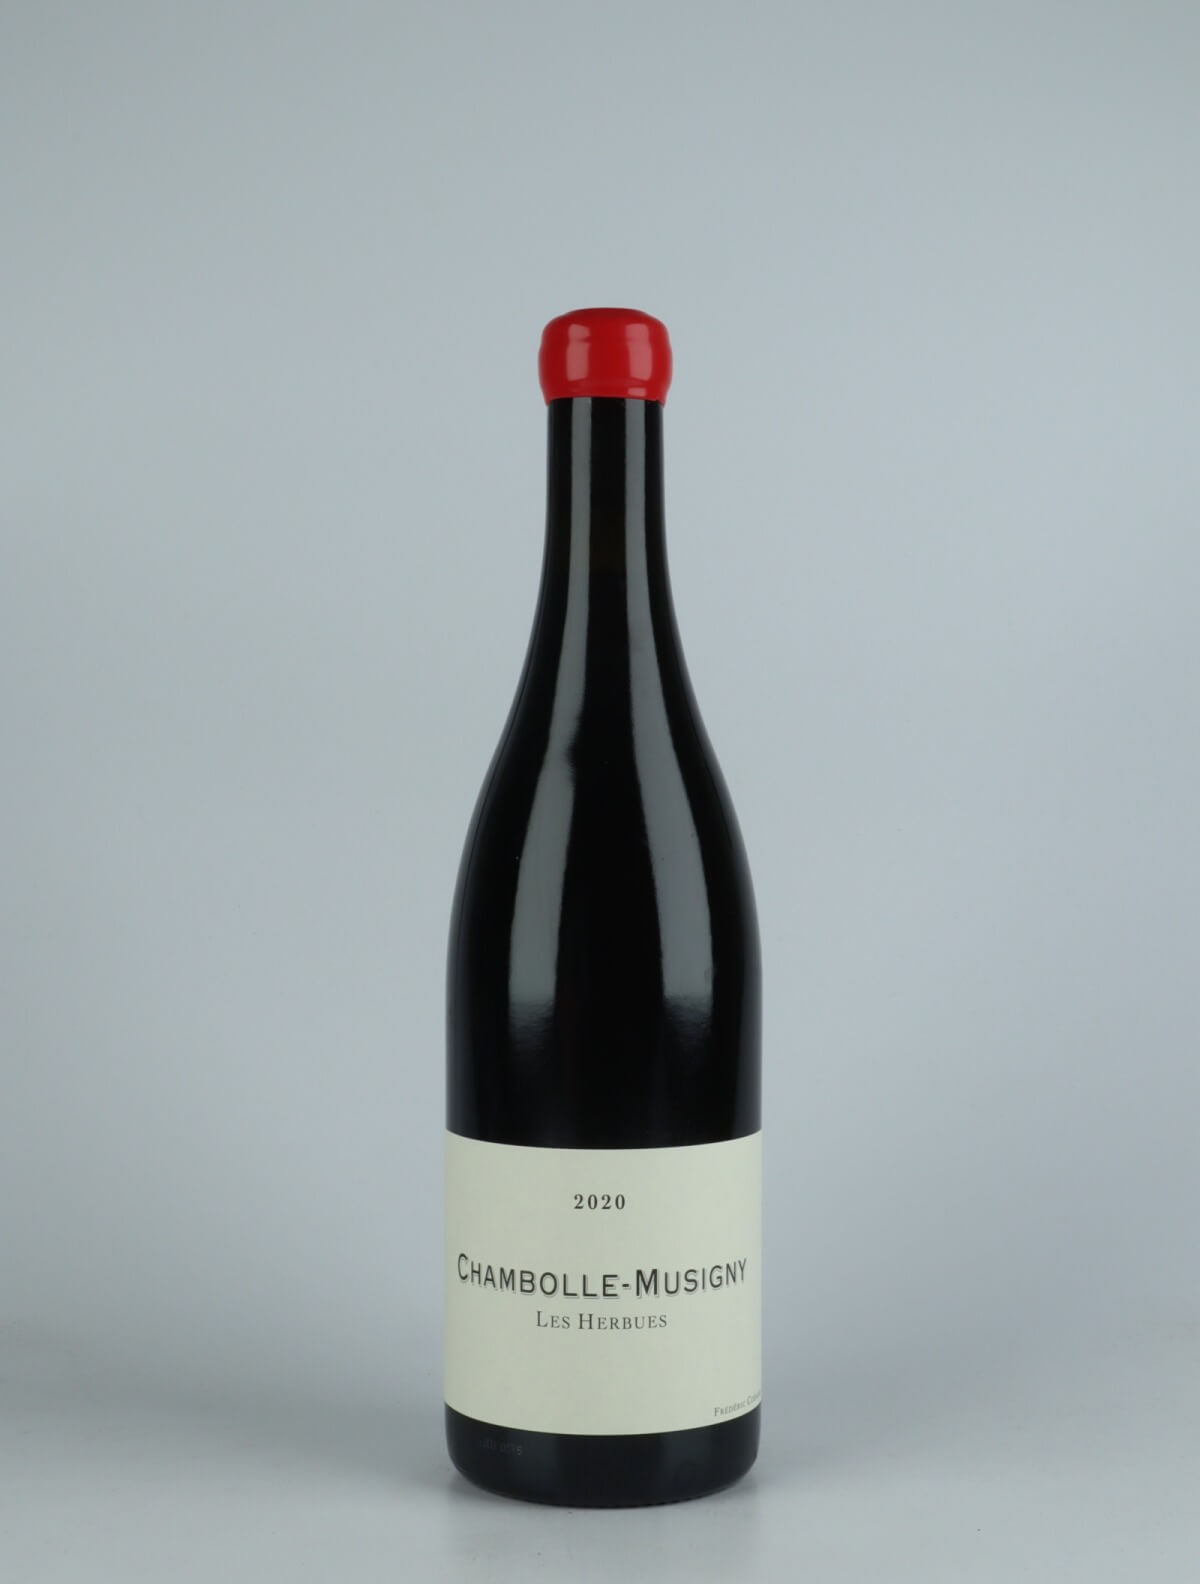 A bottle 2020 Chambolle Musigny - Les Herbues Red wine from Frédéric Cossard, Burgundy in France